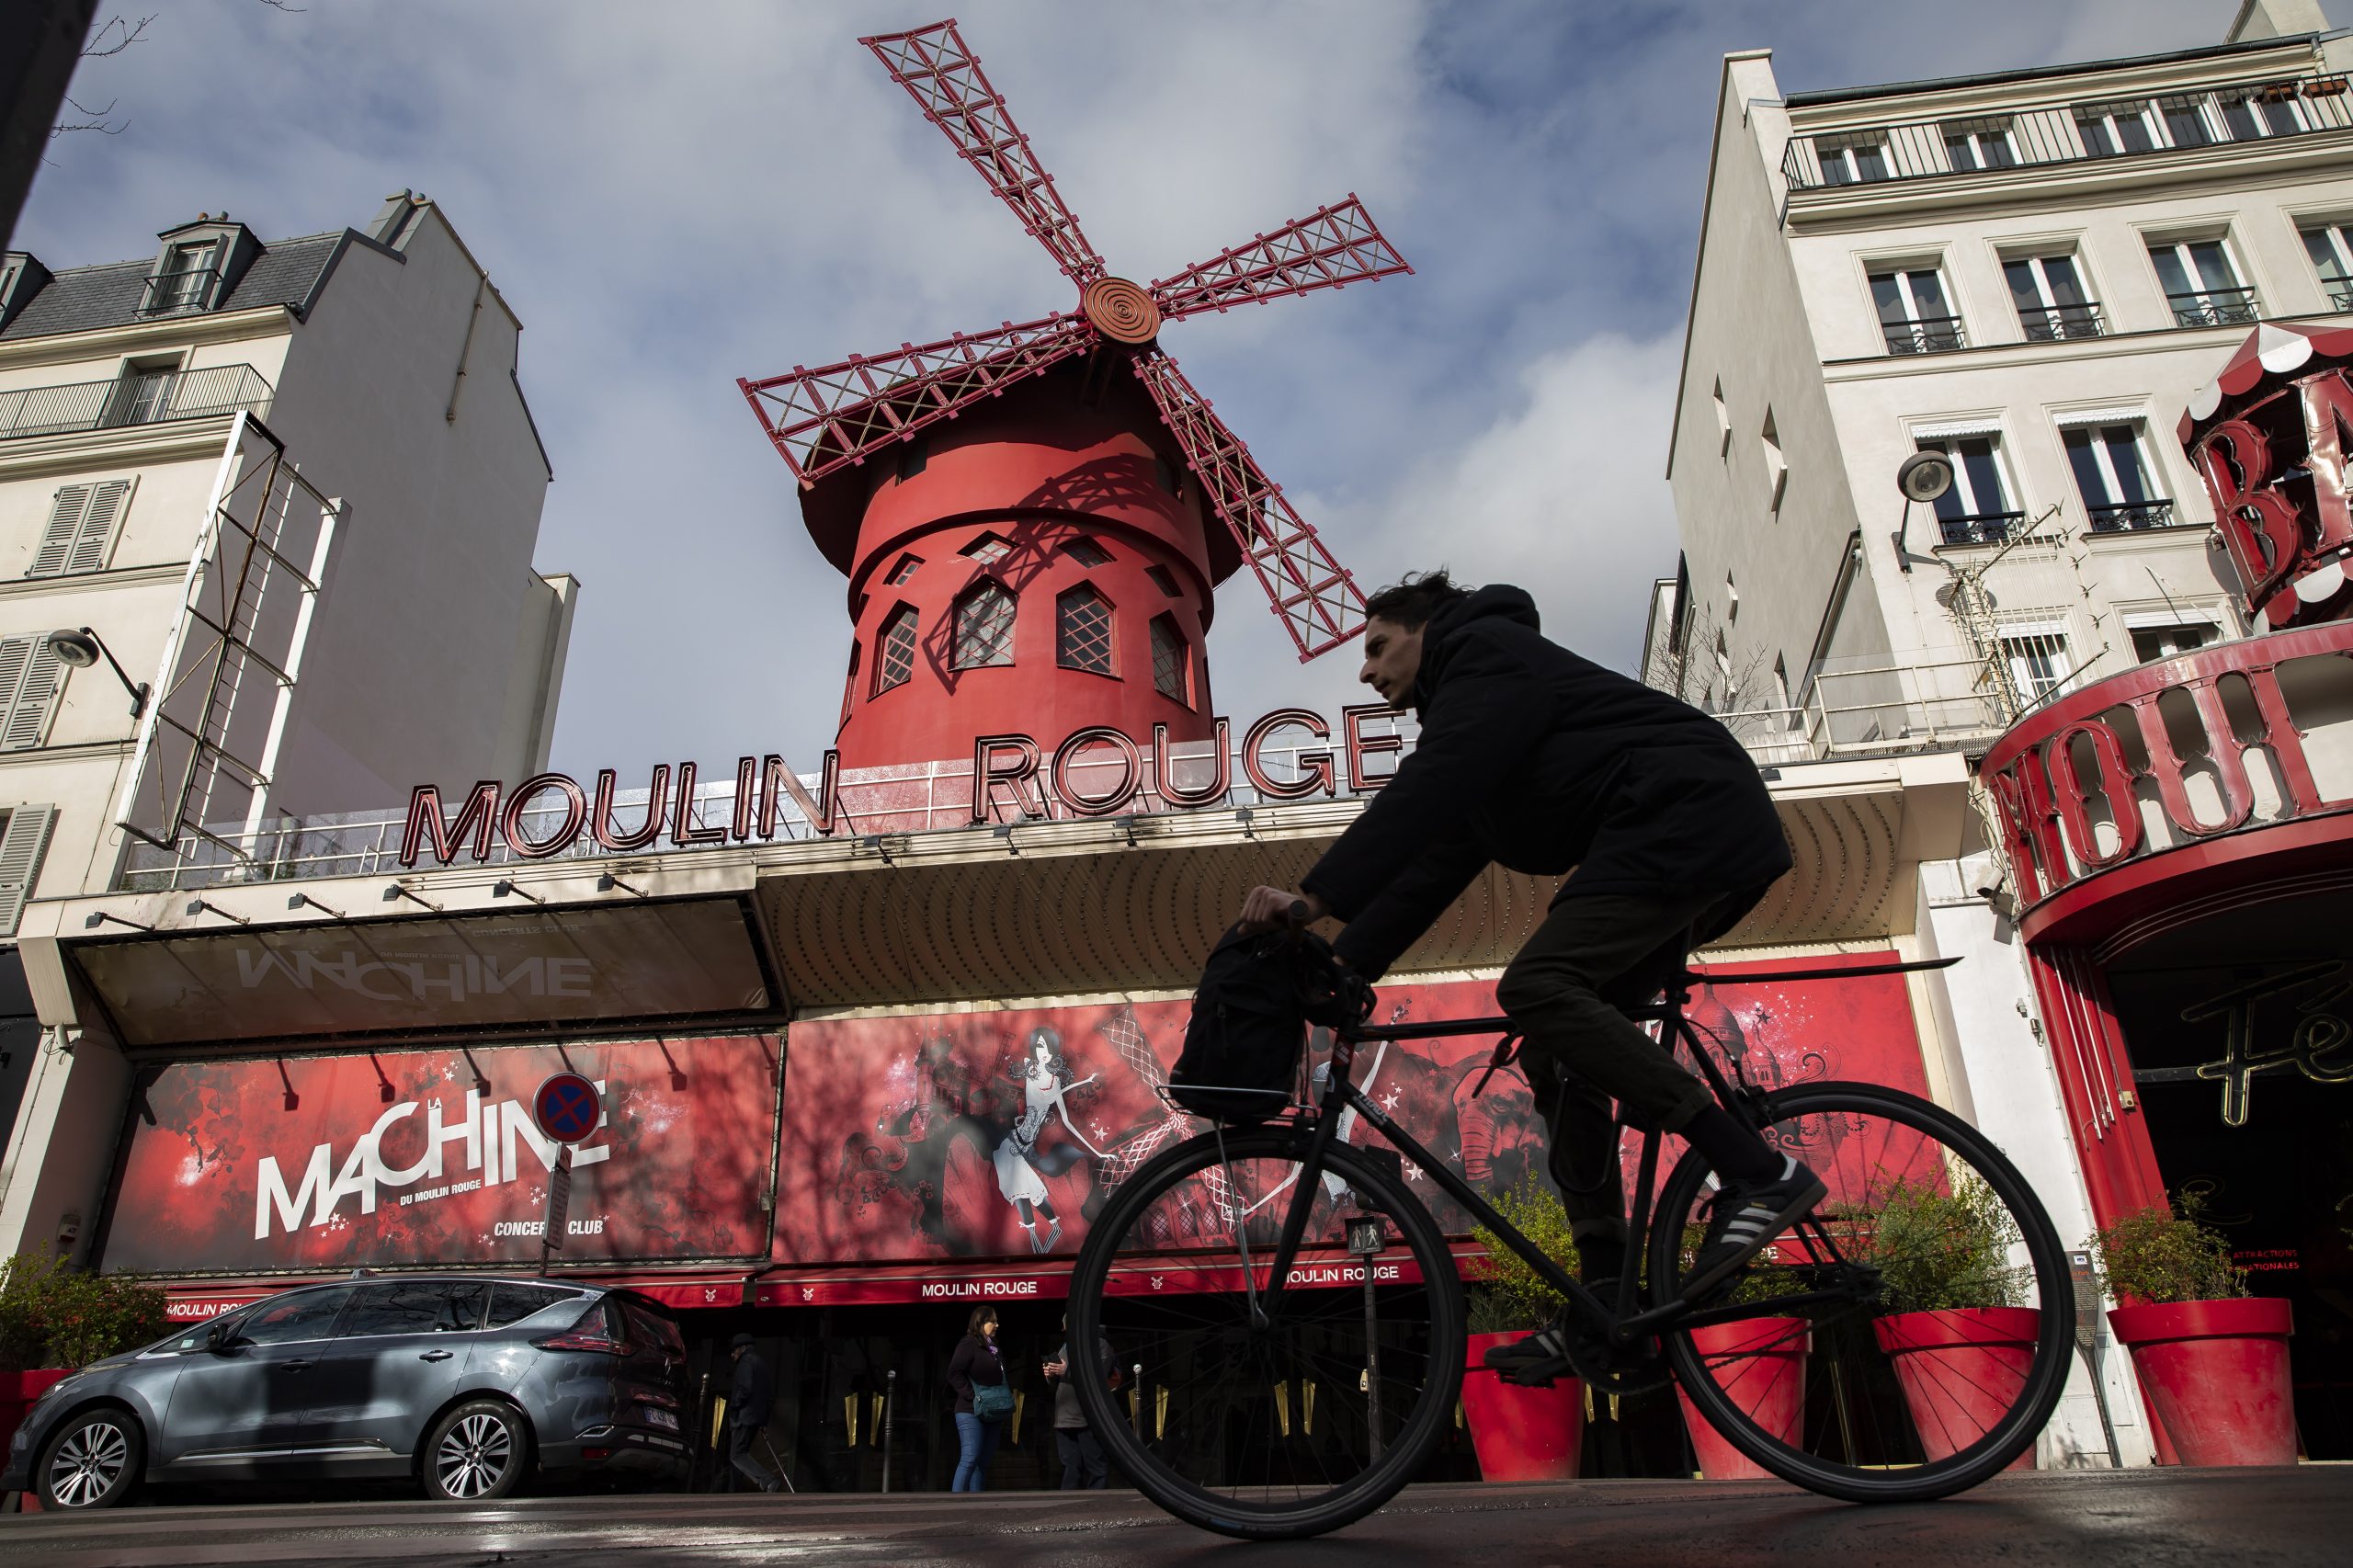 epa08294517 A man cycles past the Moulin Rouge cabaret which closed as part of measures to contain the spread of coronavirus SARS-CoV-2 which causes the Covid-19 disease, in Paris, France, 14 March 2020. France will ban all gatherings of more than 100 people due to the coronavirus pandemic, French Prime Minister Philippe announced on 13 March 2020. President Macron announced the closing of schools, high schools and nurseries from 16 March 2020 on. Over 3,660 cases of COVID-19 infections and 79 deaths have been confirmed so far in France, reports state.  EPA/IAN LANGSDON